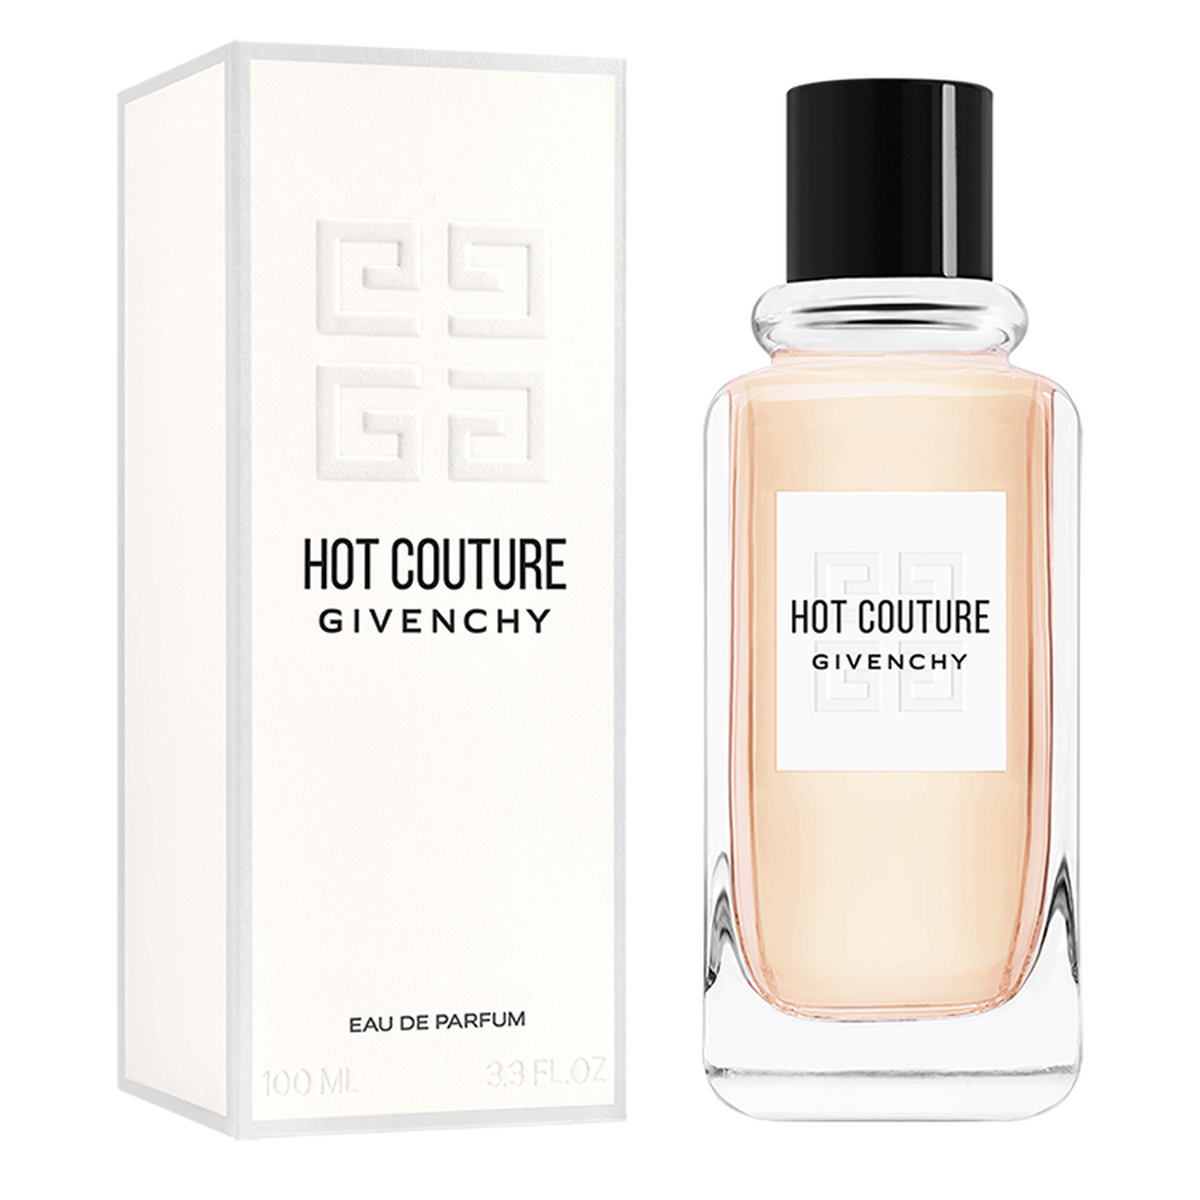 HOT COUTURE